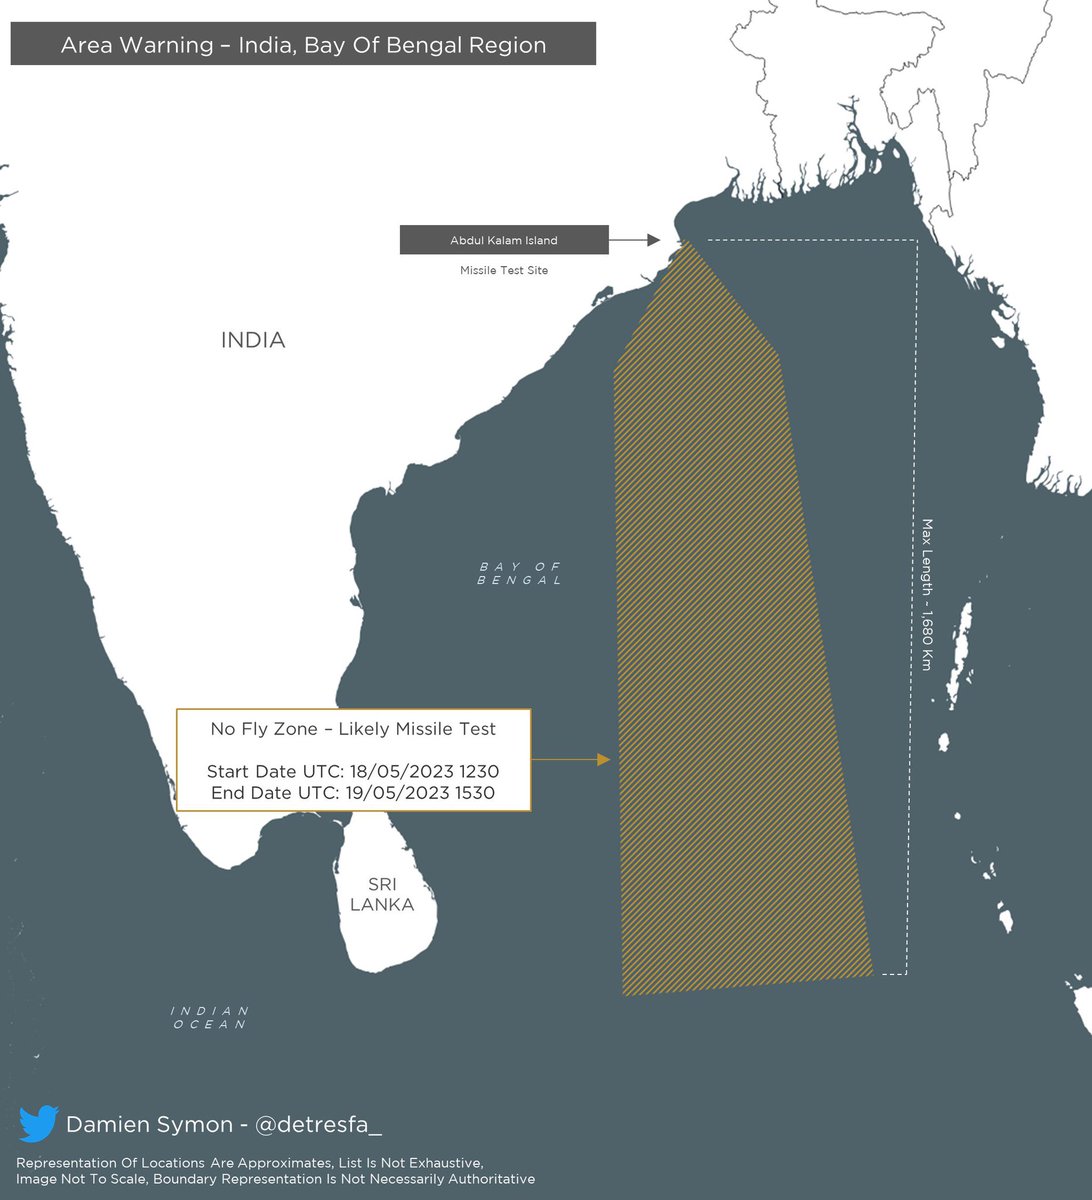 On 18-19 May 2023 India announces #AreaWarning for a no fly zone over the #BayOfBengal just few miles away from Sri Lankan EEZ, indicative of a likely missile test via @detresfa_